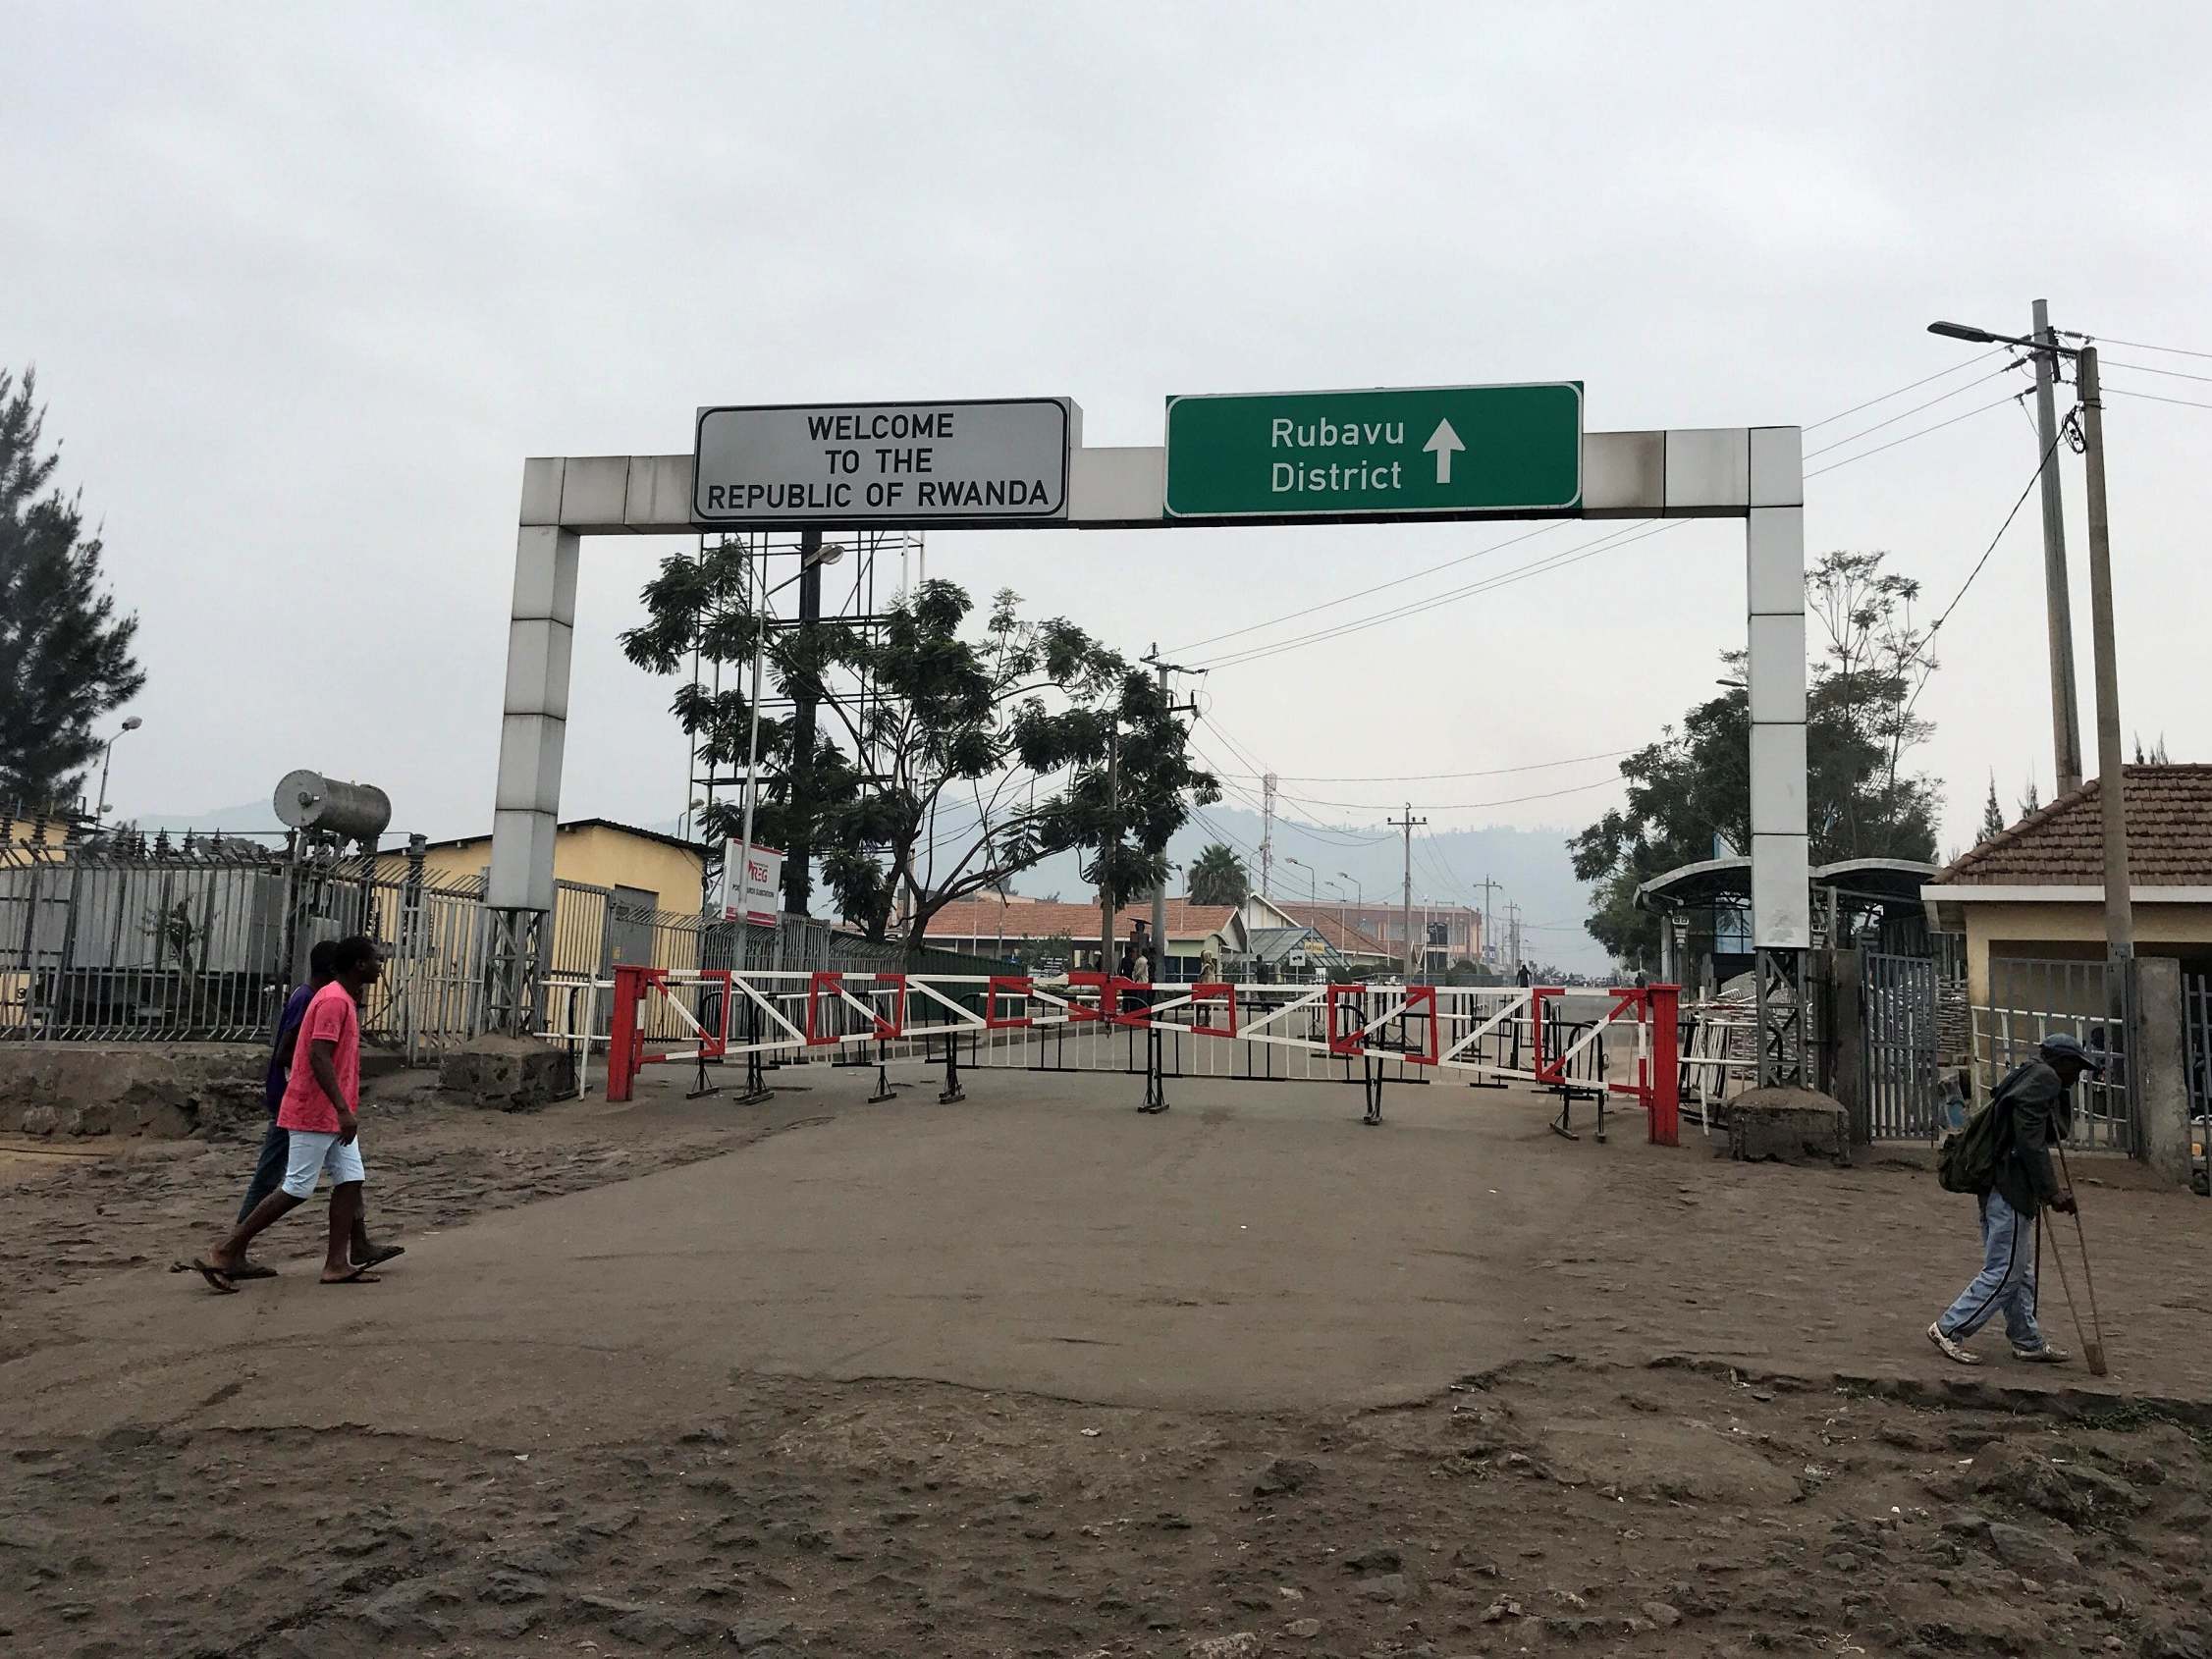 Border between Rwanda and the DRC was shut contrary to WHO advice